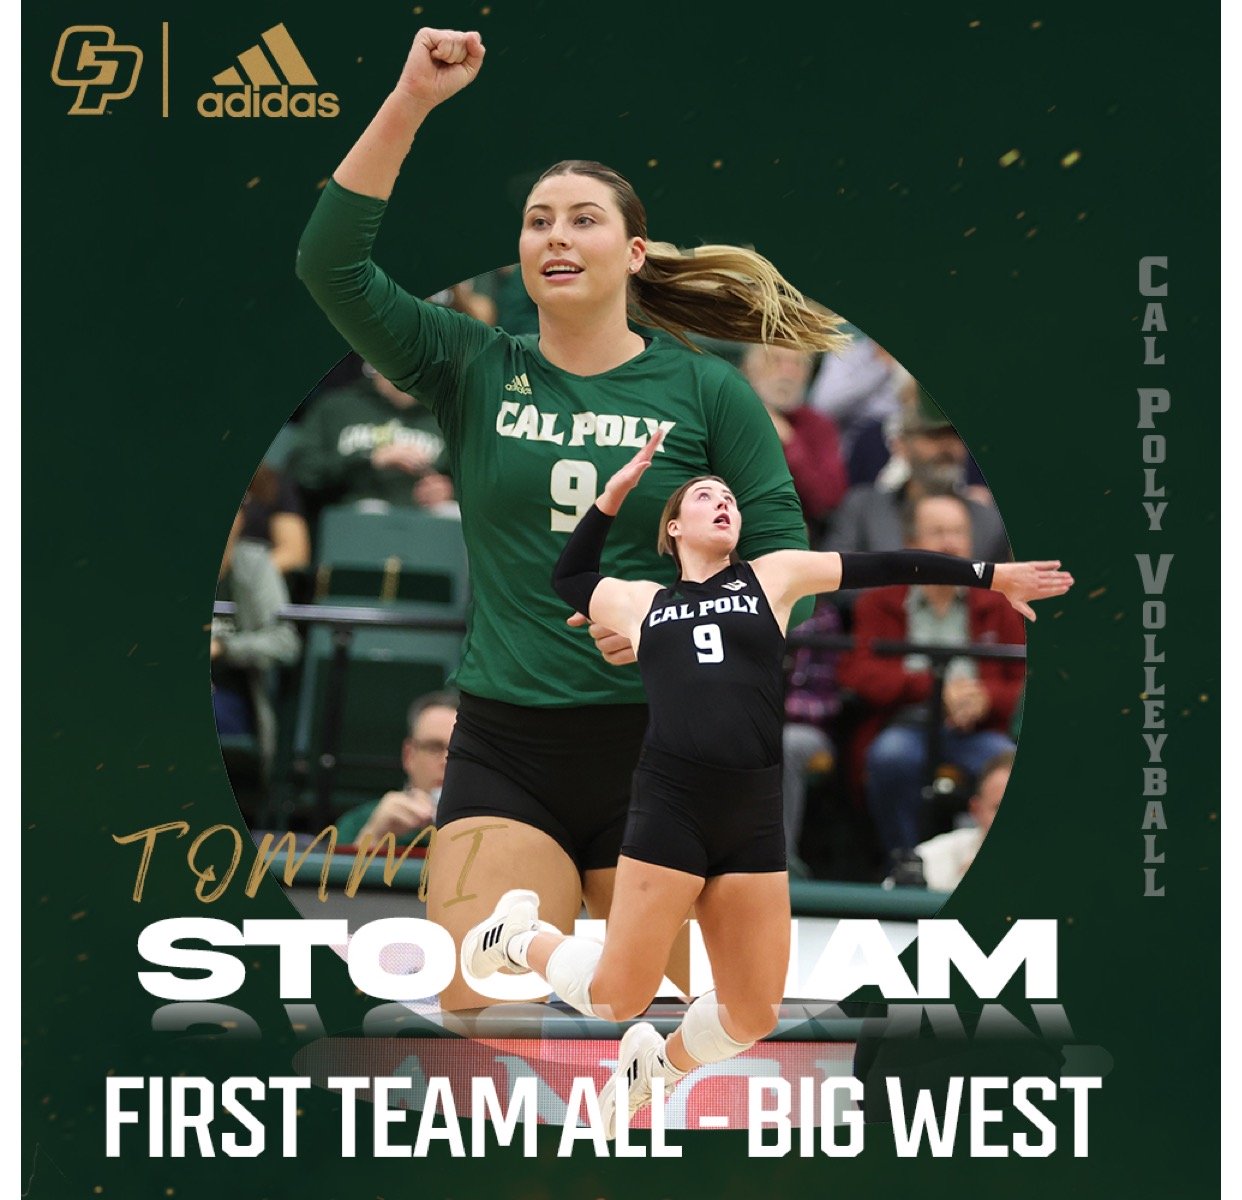 Tommi Stockham                                            First Team All Big West                  Conference Team

Private Volleyball Lessons Client 3+ Years